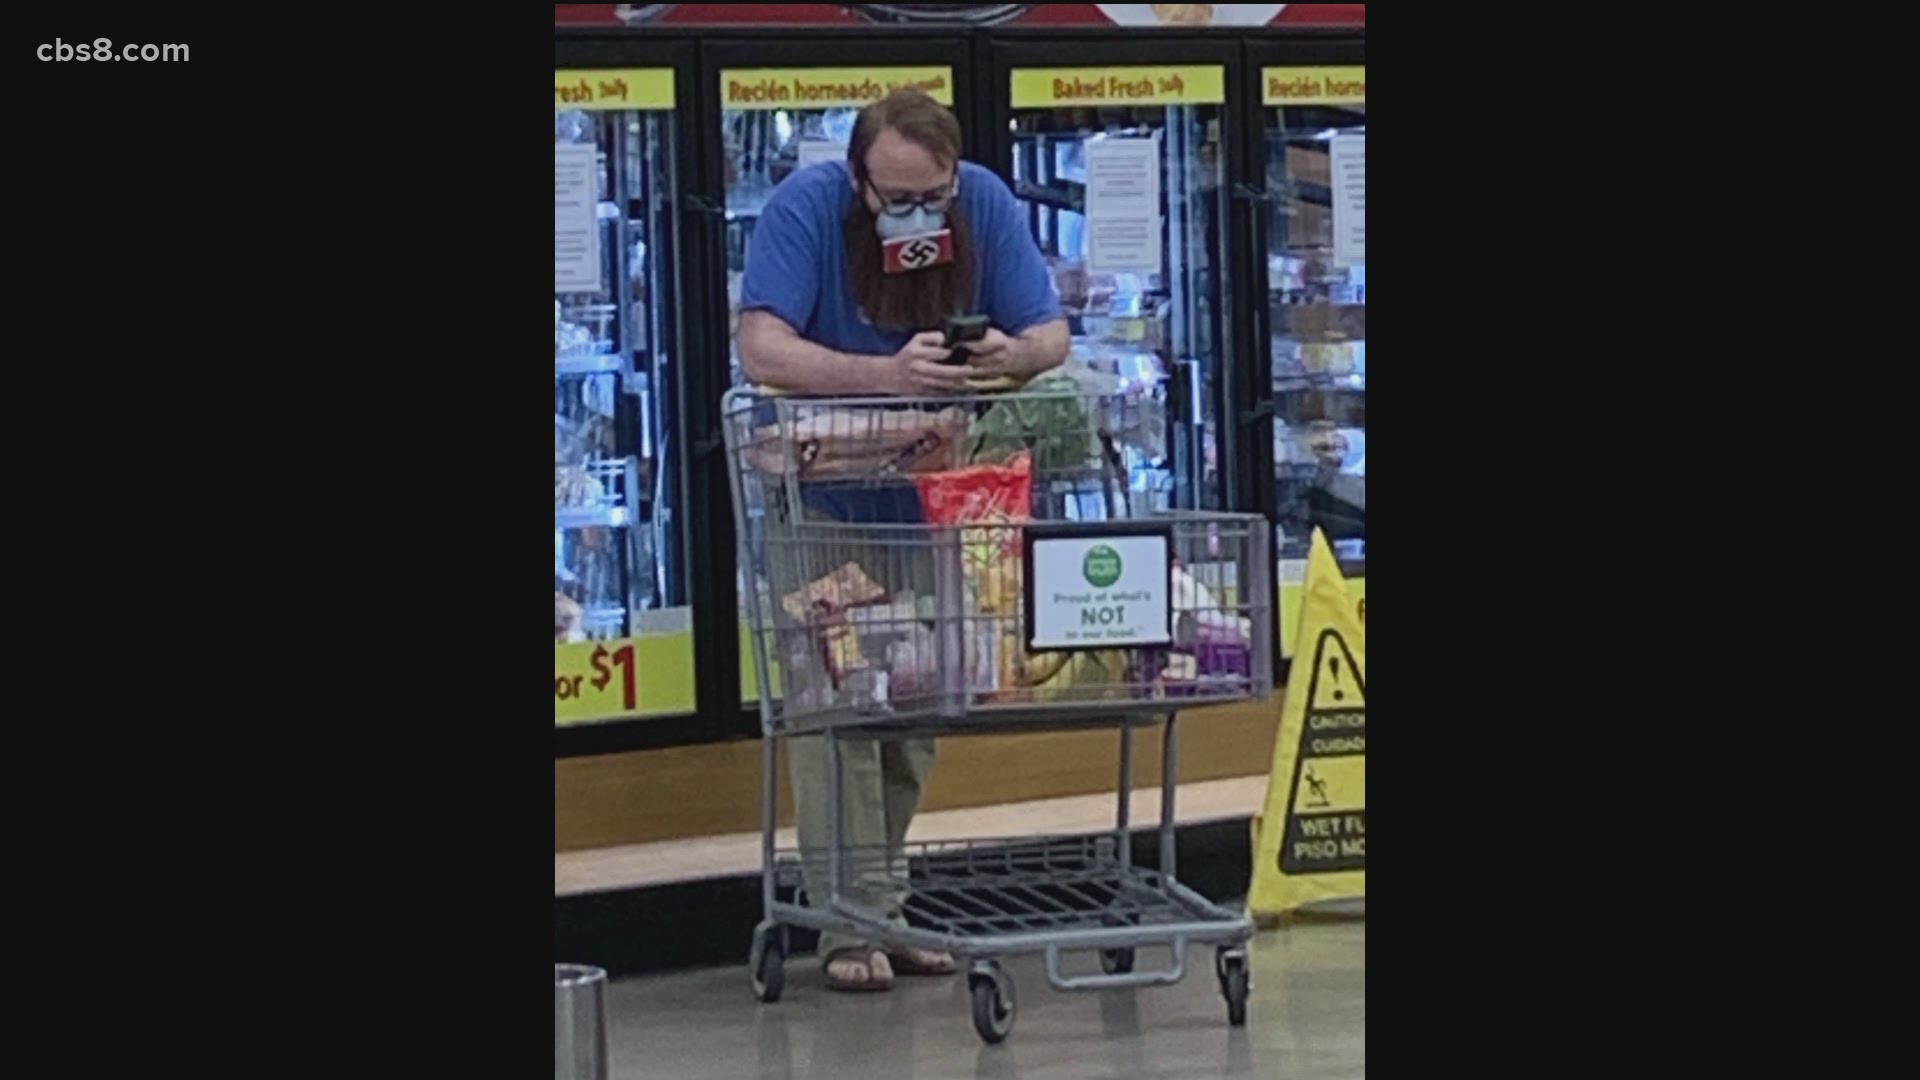 For the second time in a week, the appearance of a man wearing a face covering bearing a design associated with racist hate groups at a Santee grocery store.